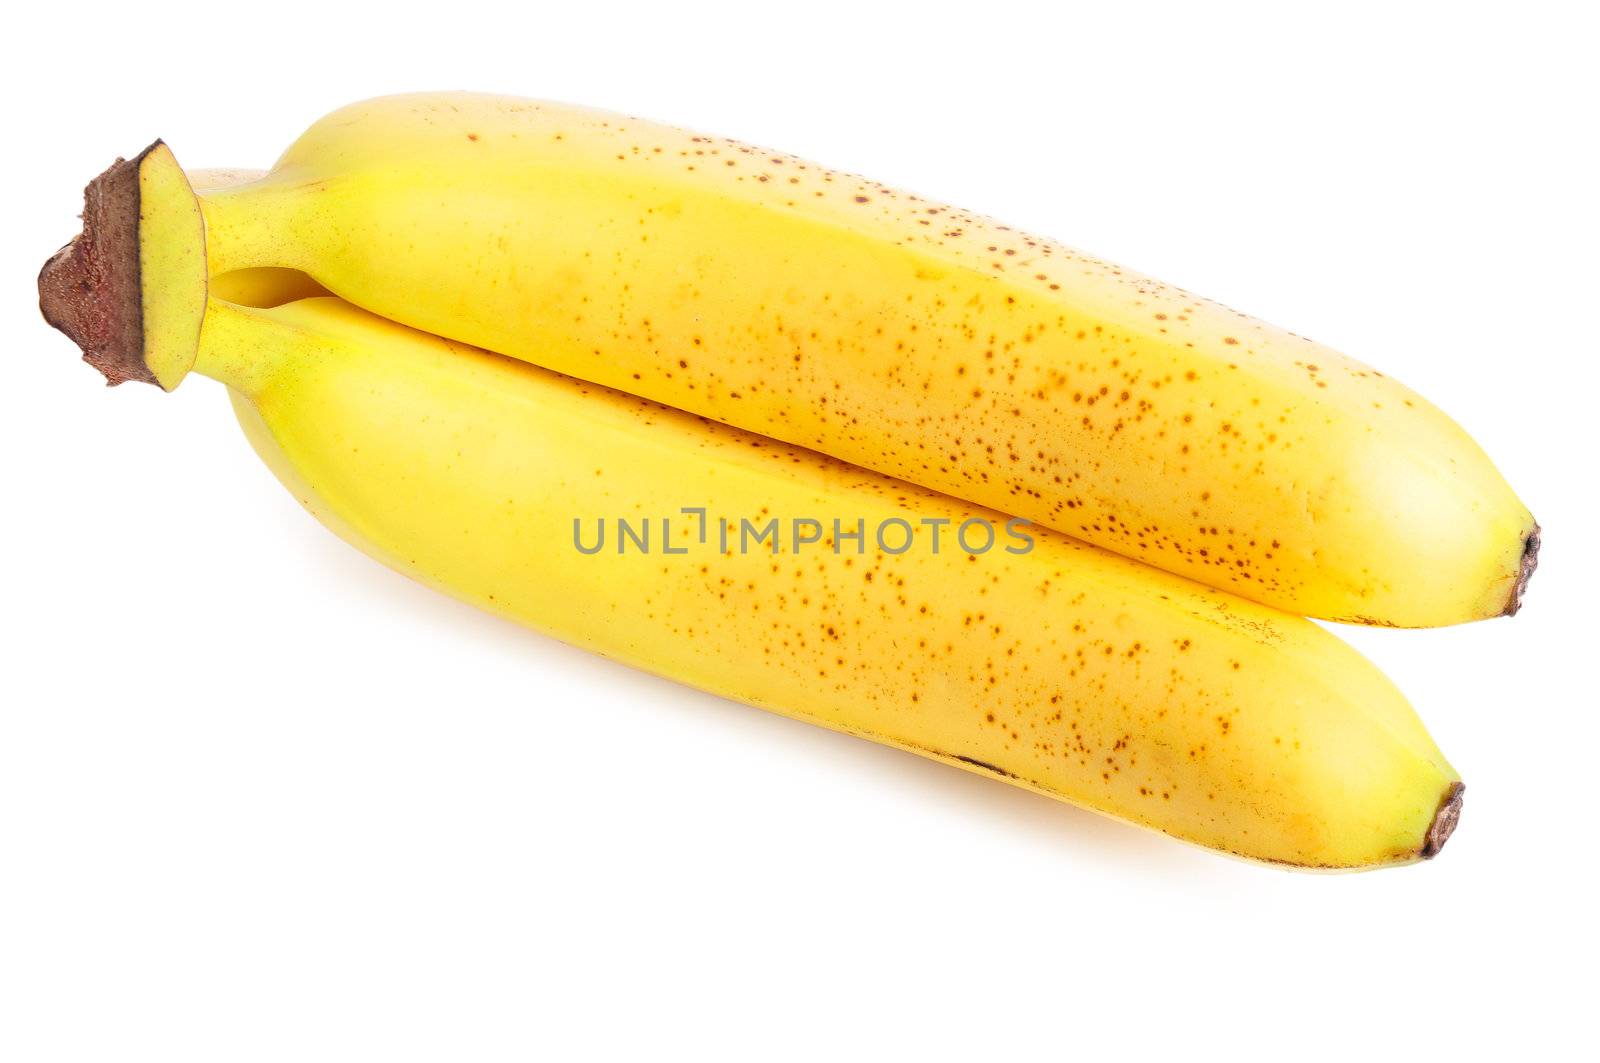 Bunch of yellow mature bananas on a white background